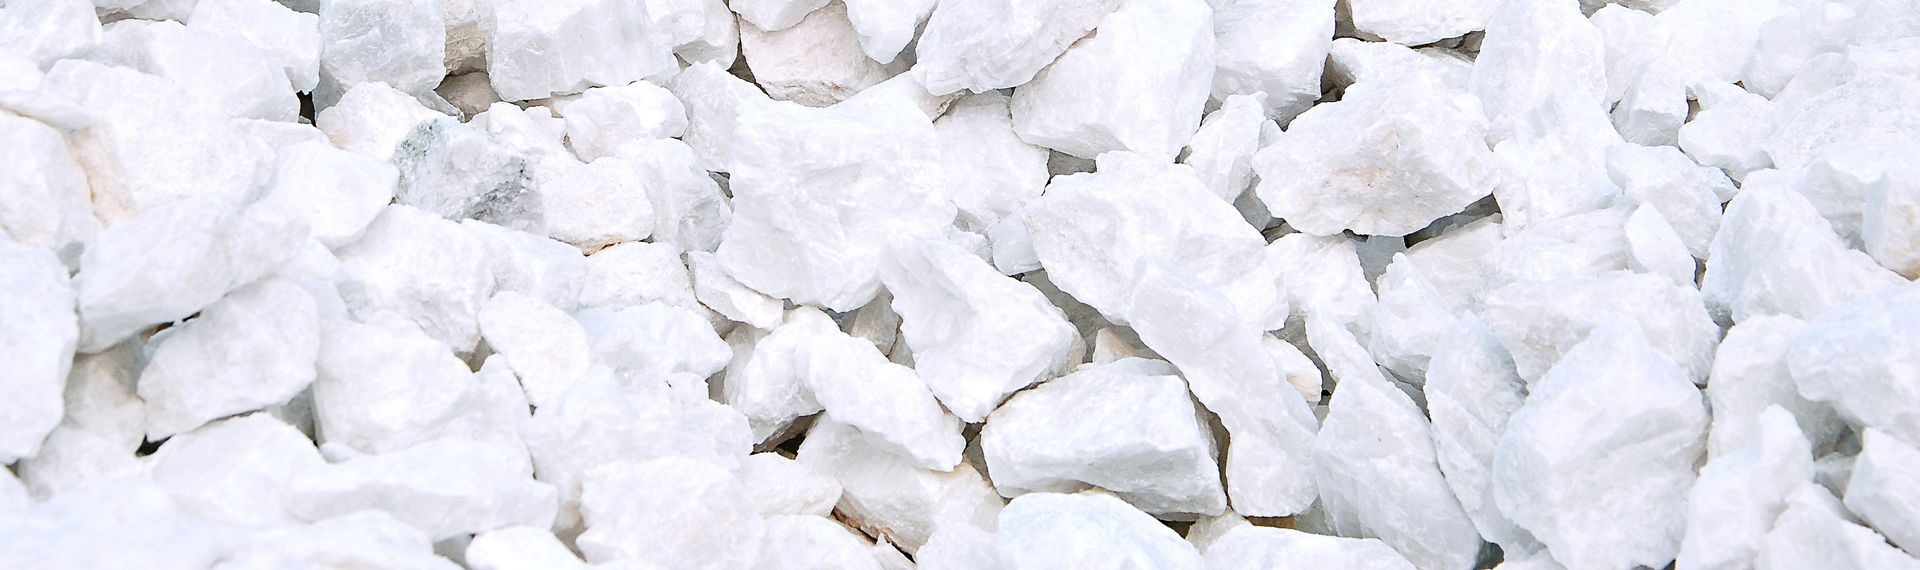 Limestone from Mong Son mine is purest quality, natural whitest consistency, tested and certified as the least abrasive currently in the market.